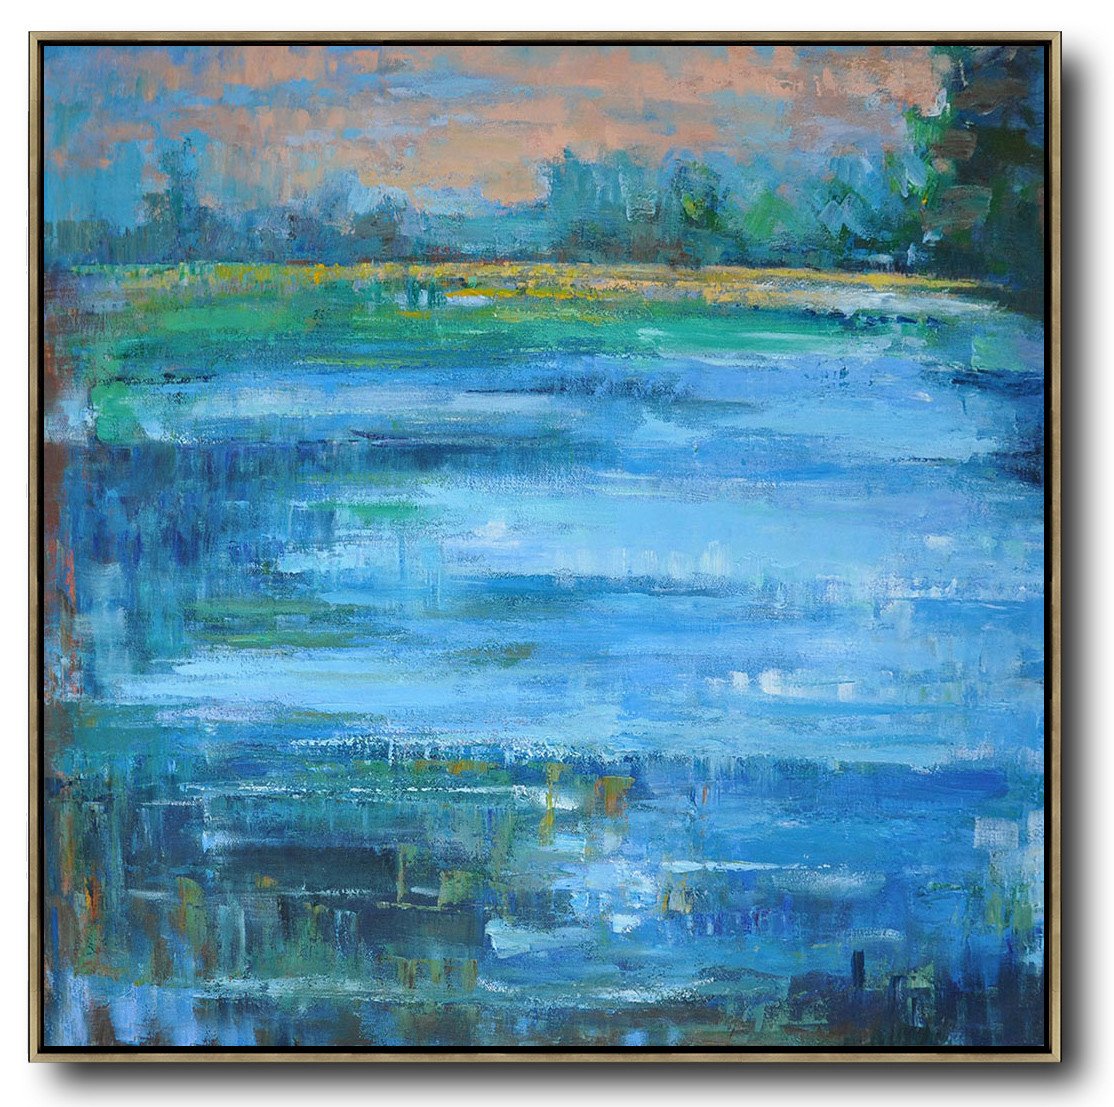 Hand-painted oversized Abstract Landscape Oil Painting by Jackson impressionist art